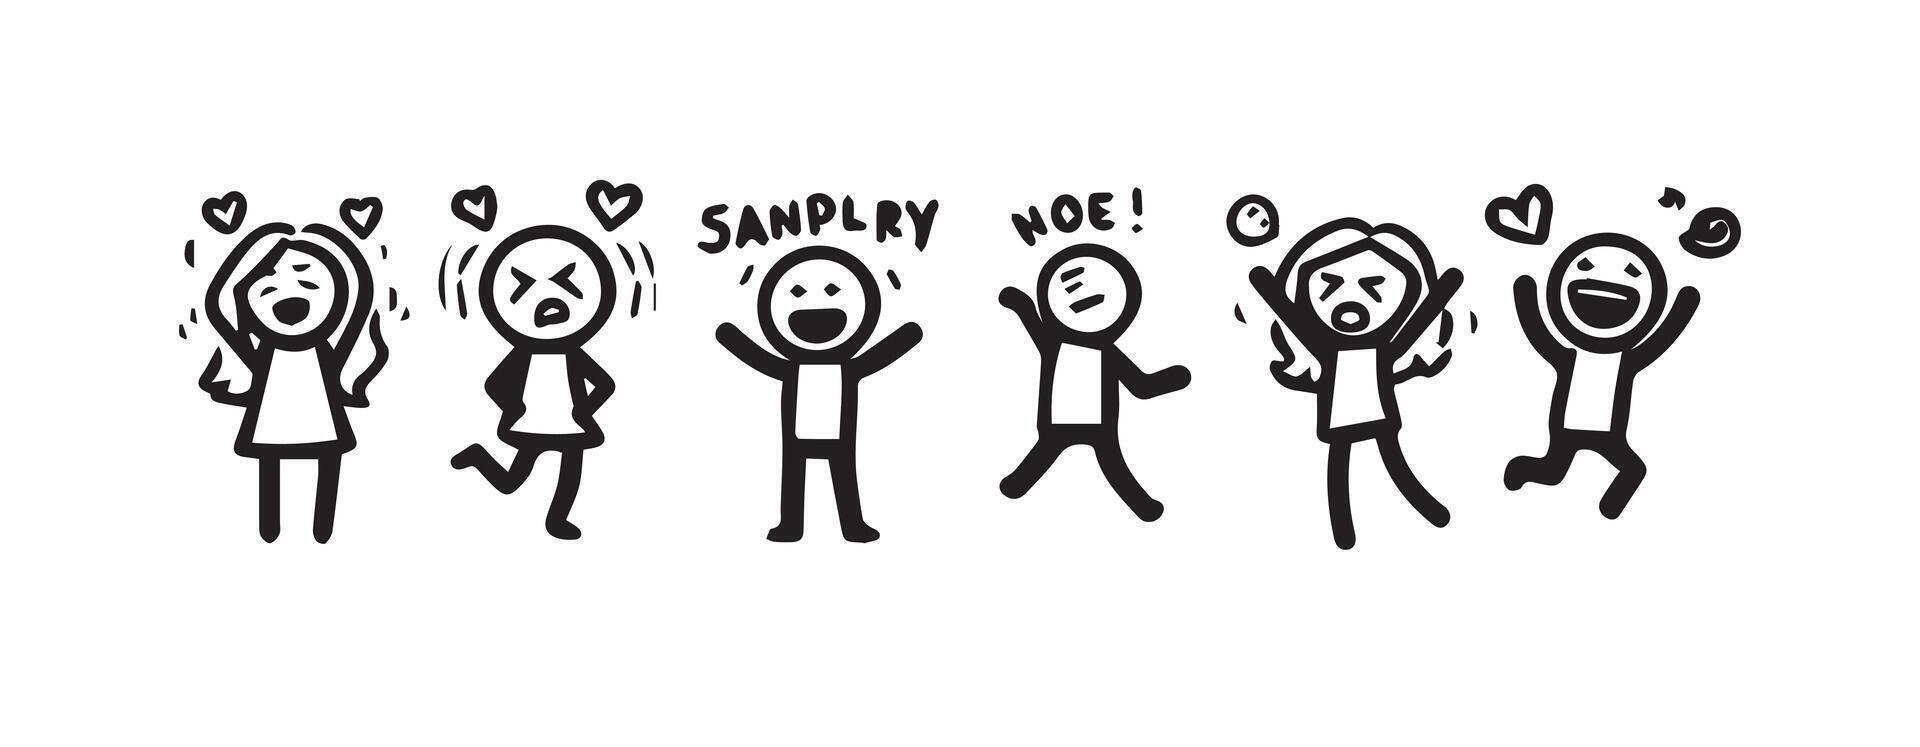 Set of stick figures in different emotions vector